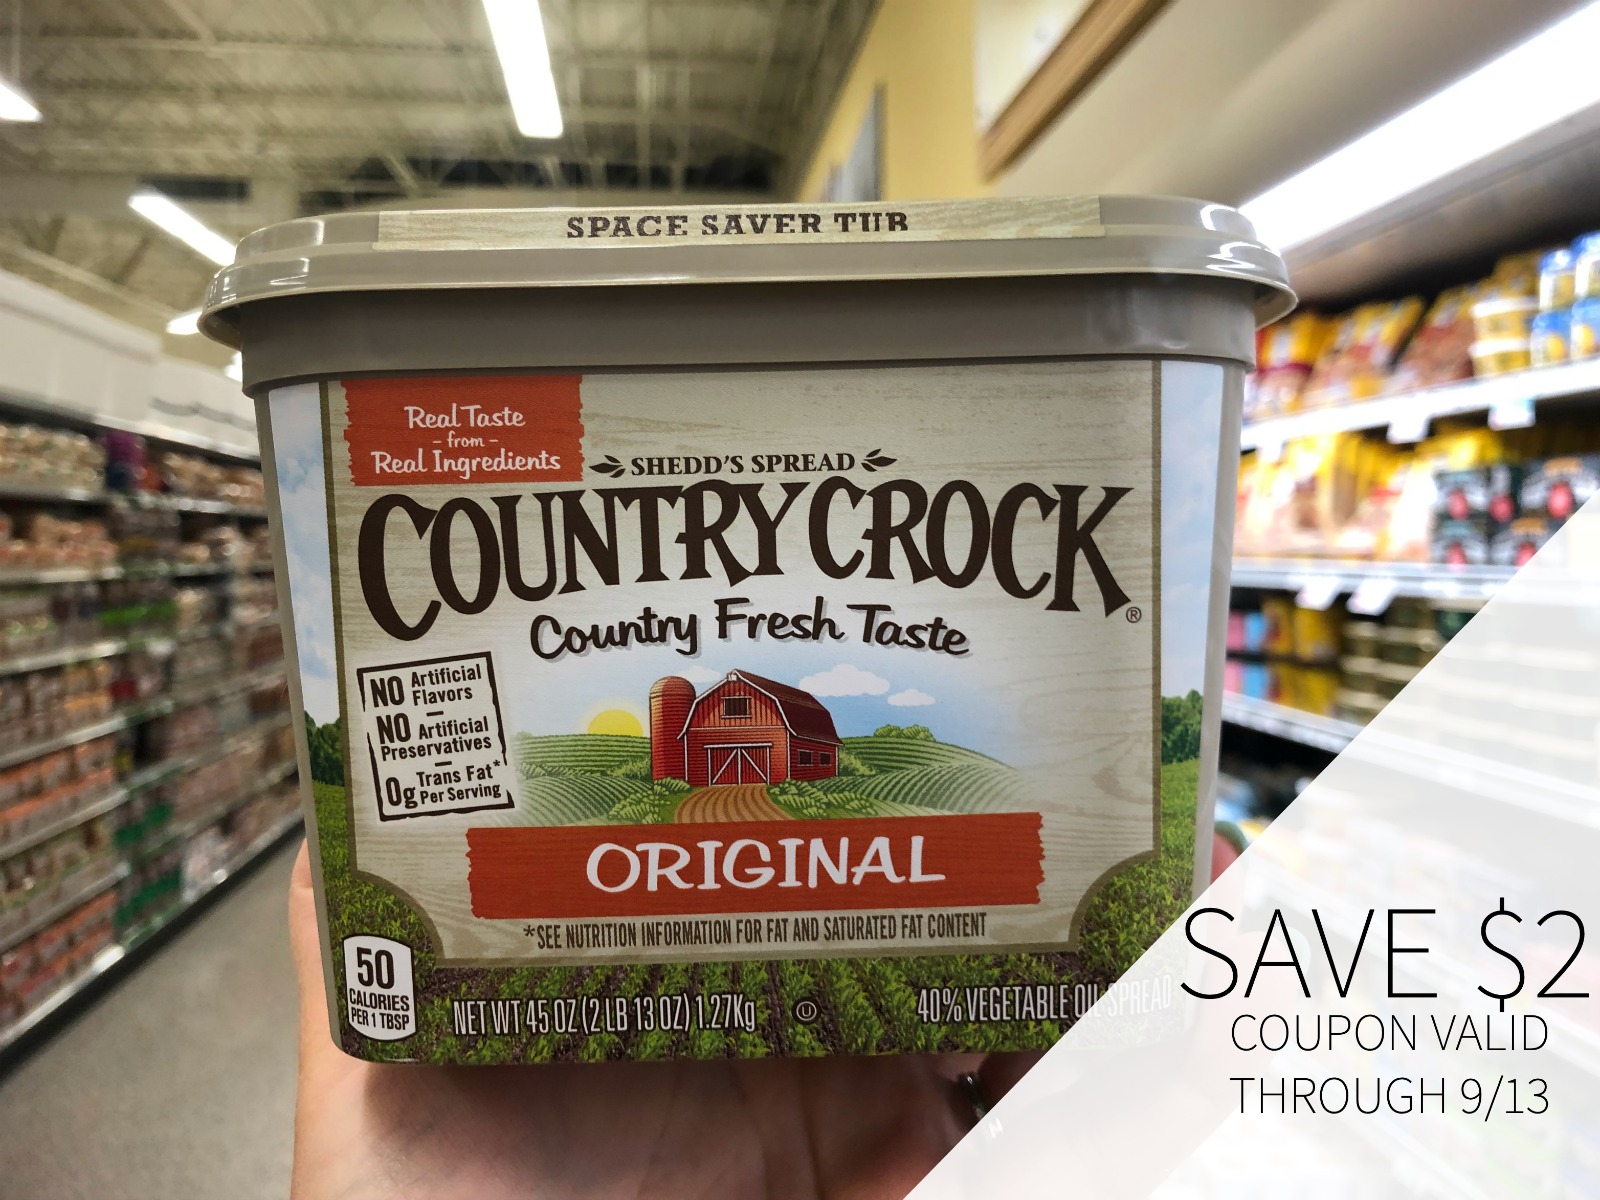 Last Week To Save $2 On Country Crock At Publix! on I Heart Publix